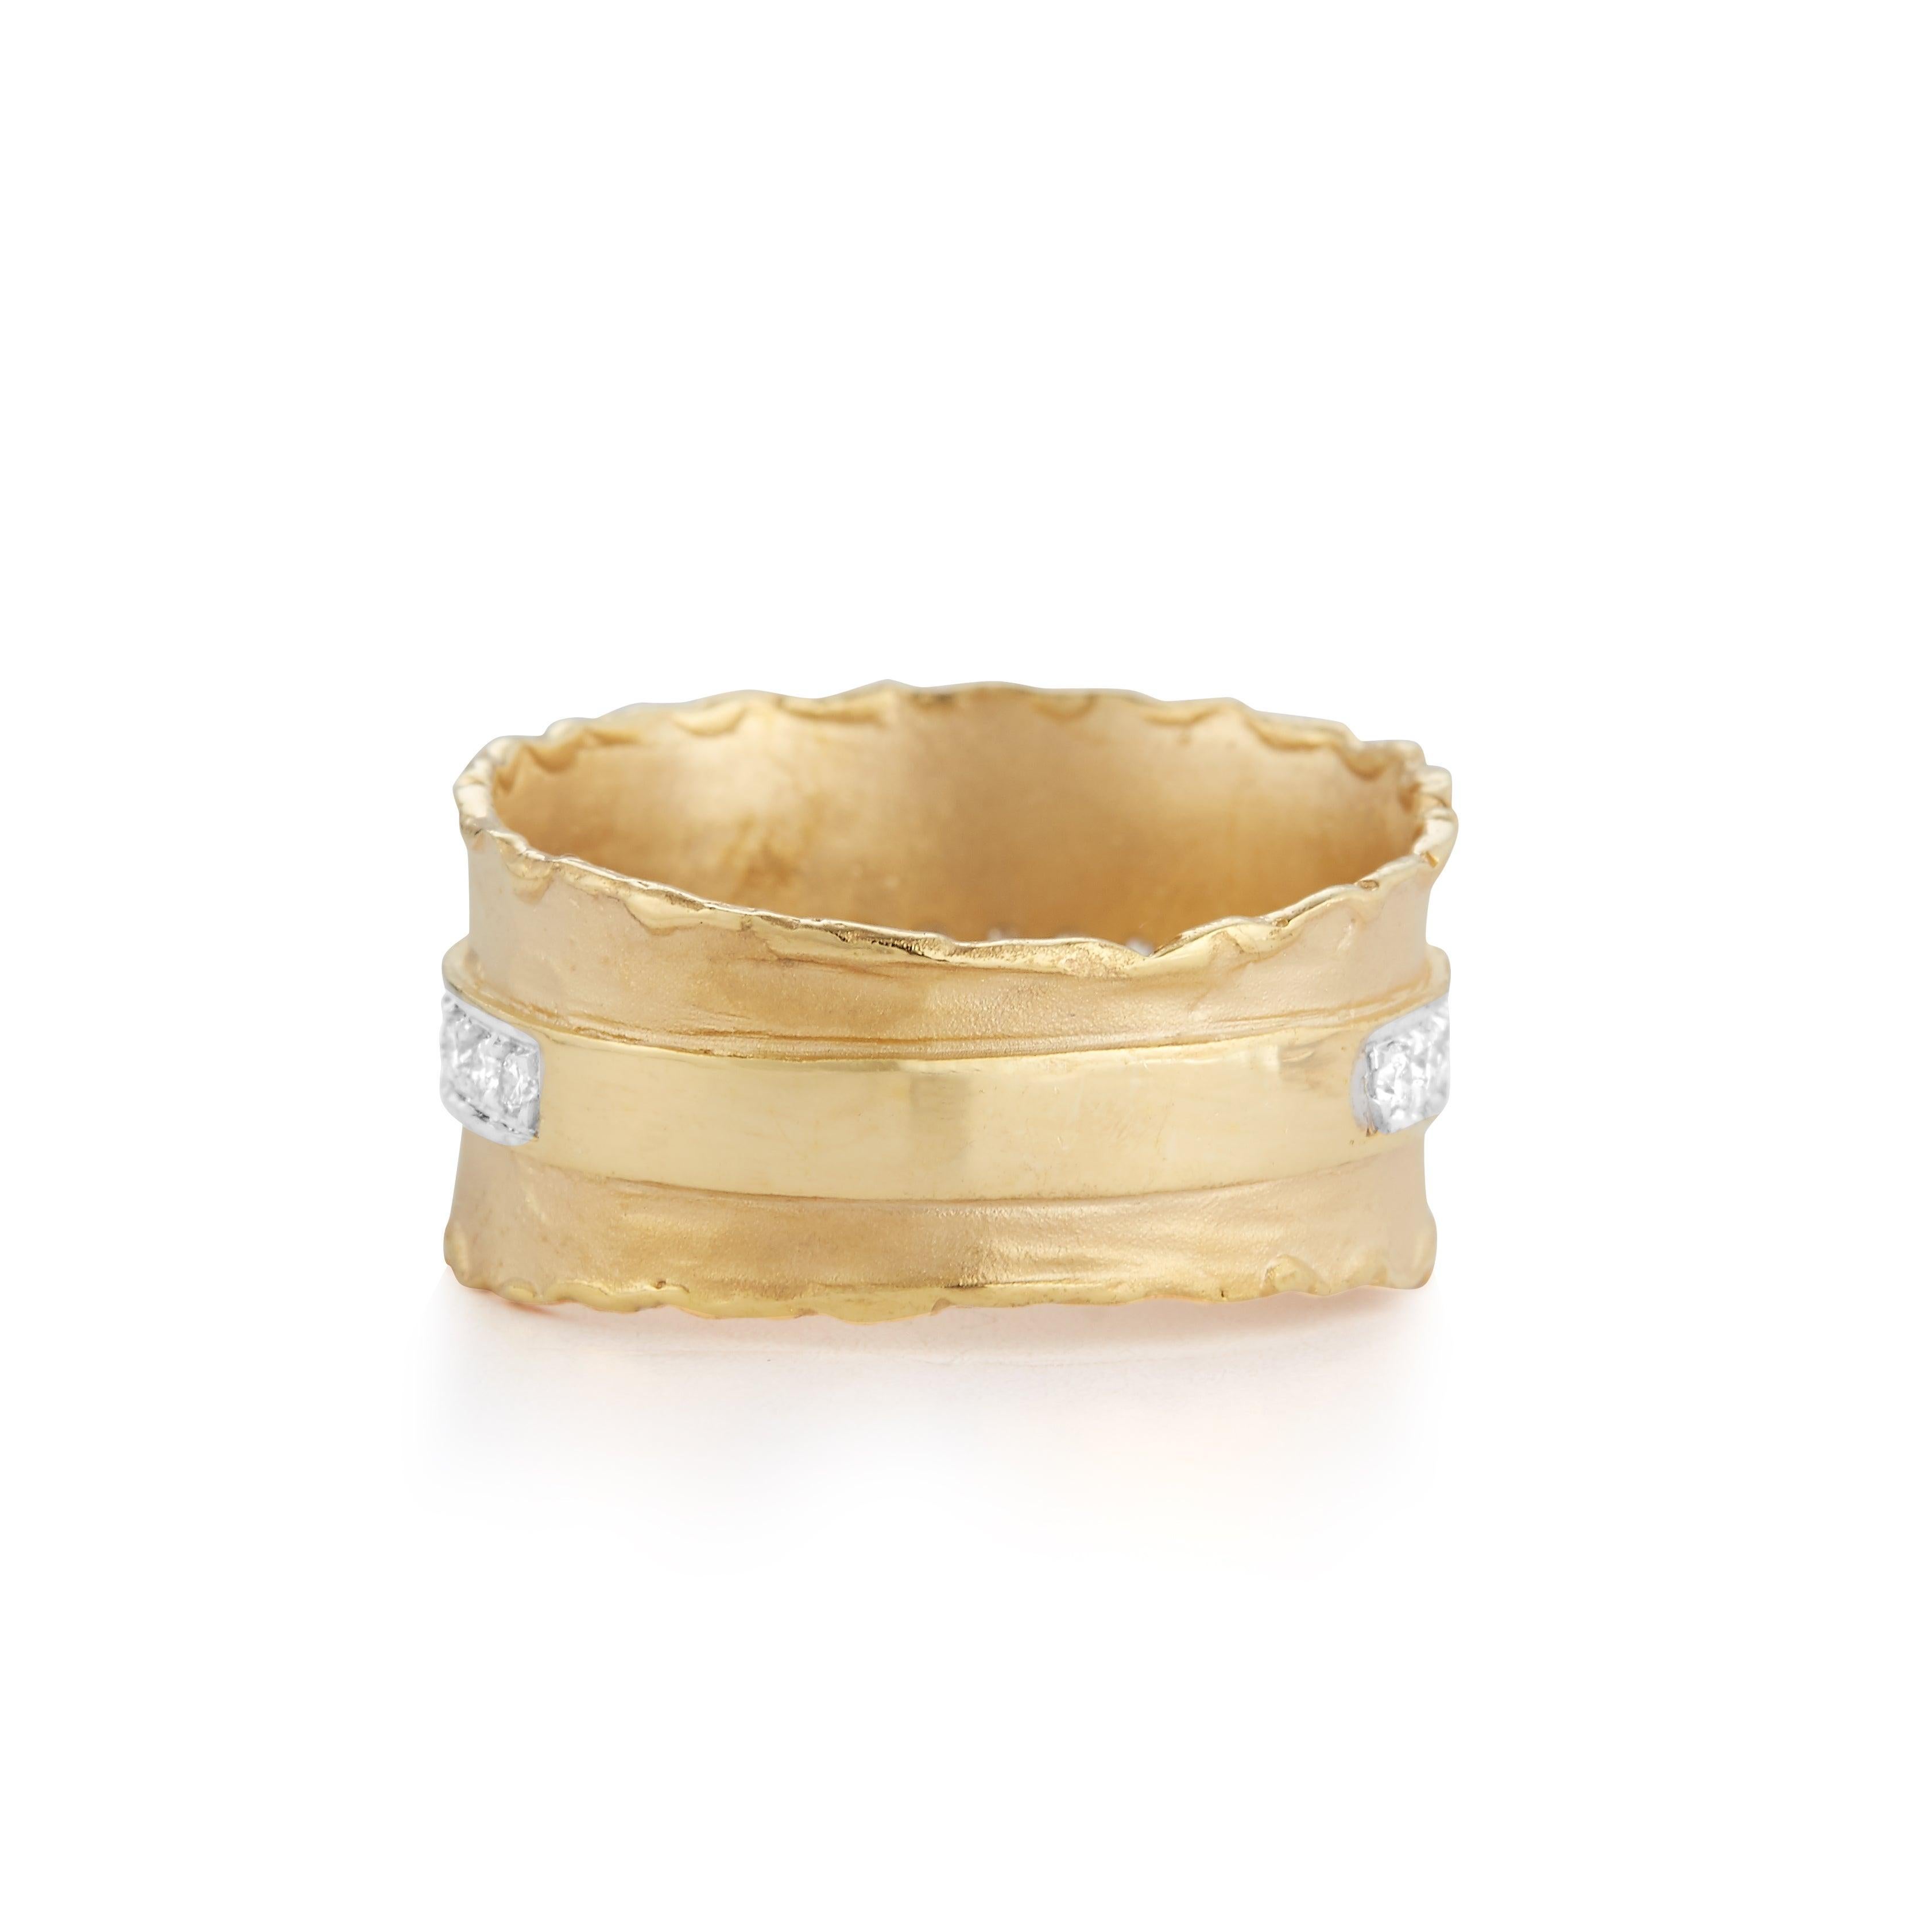 For Sale:  Hand-Crafted 14 Karat Yellow Gold Ruffled Edge Ring 4